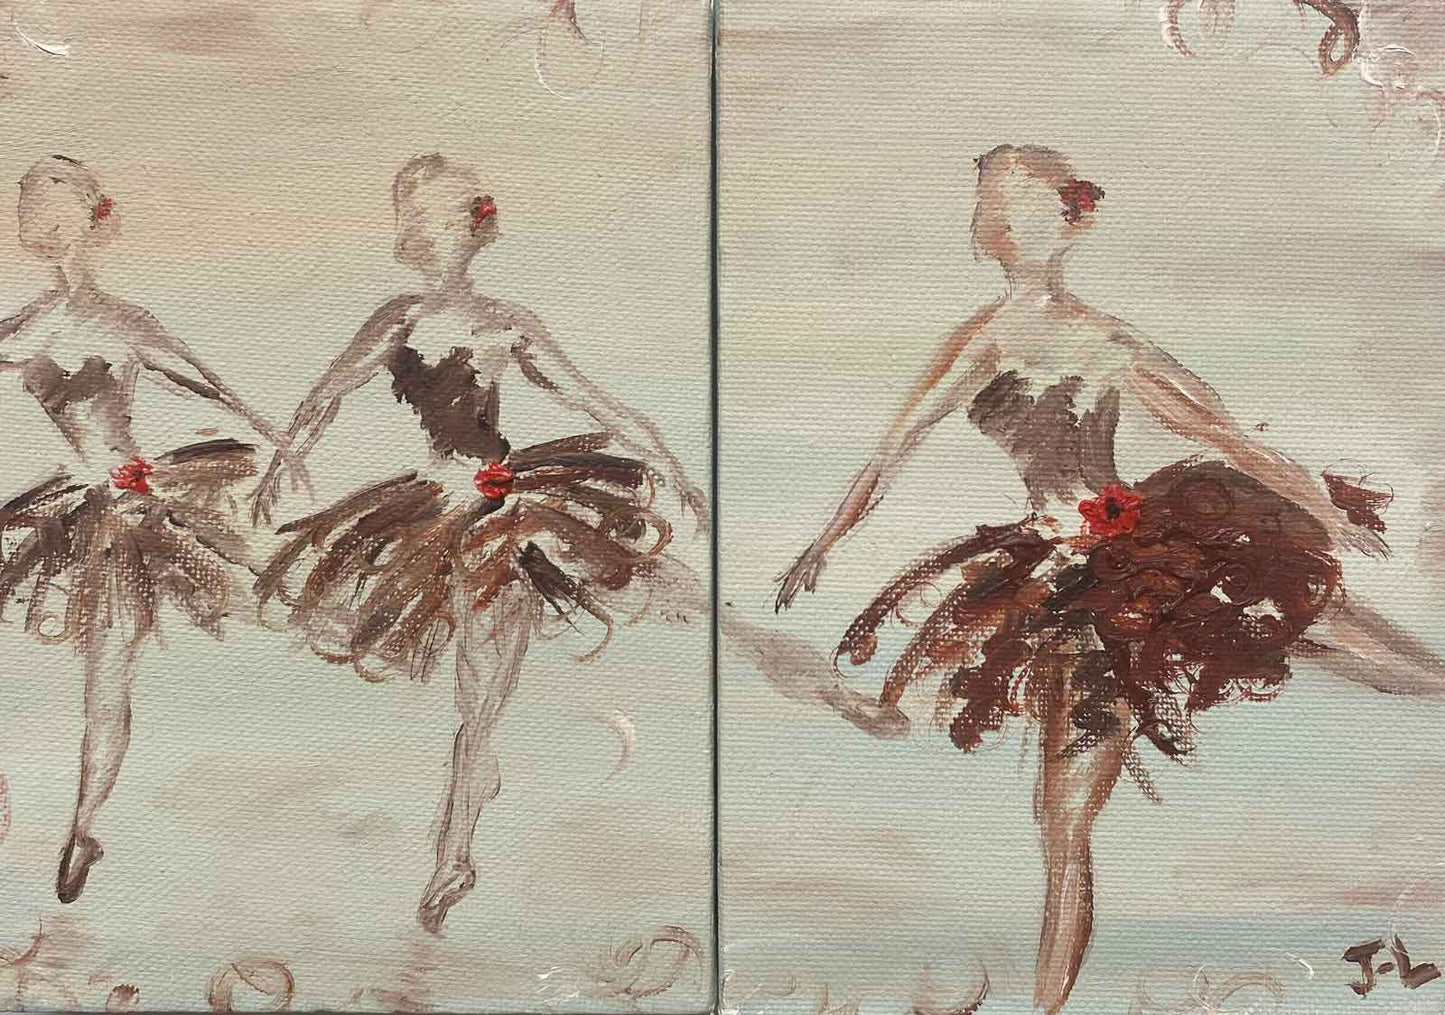 Diptych painting with 3 ballerinas poised in arabesque